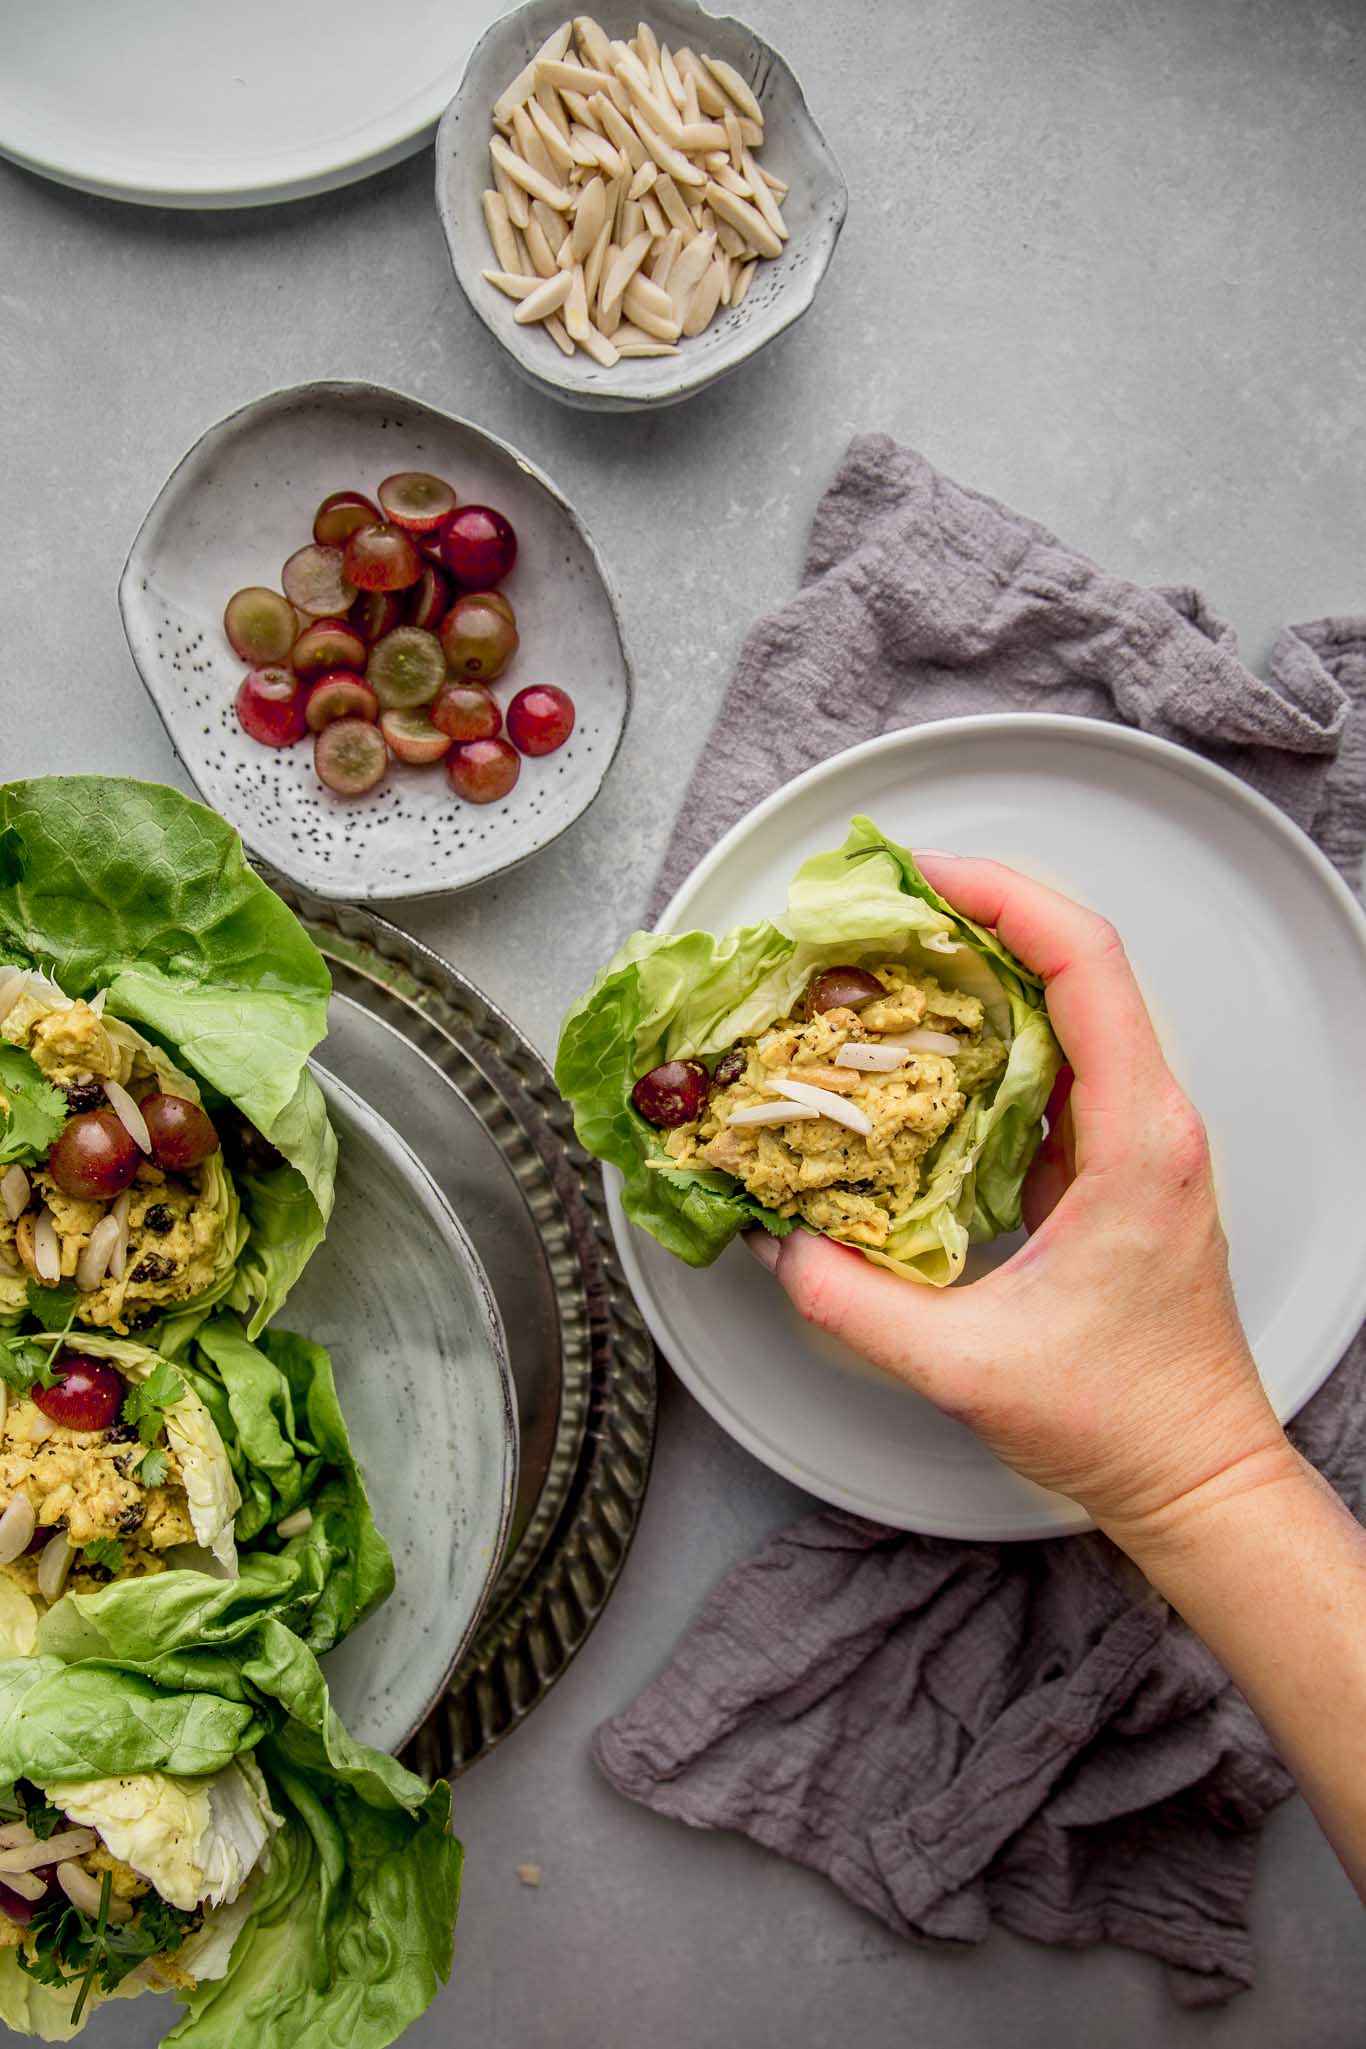 Hand reaching for curry chicken salad lettuce wrap.